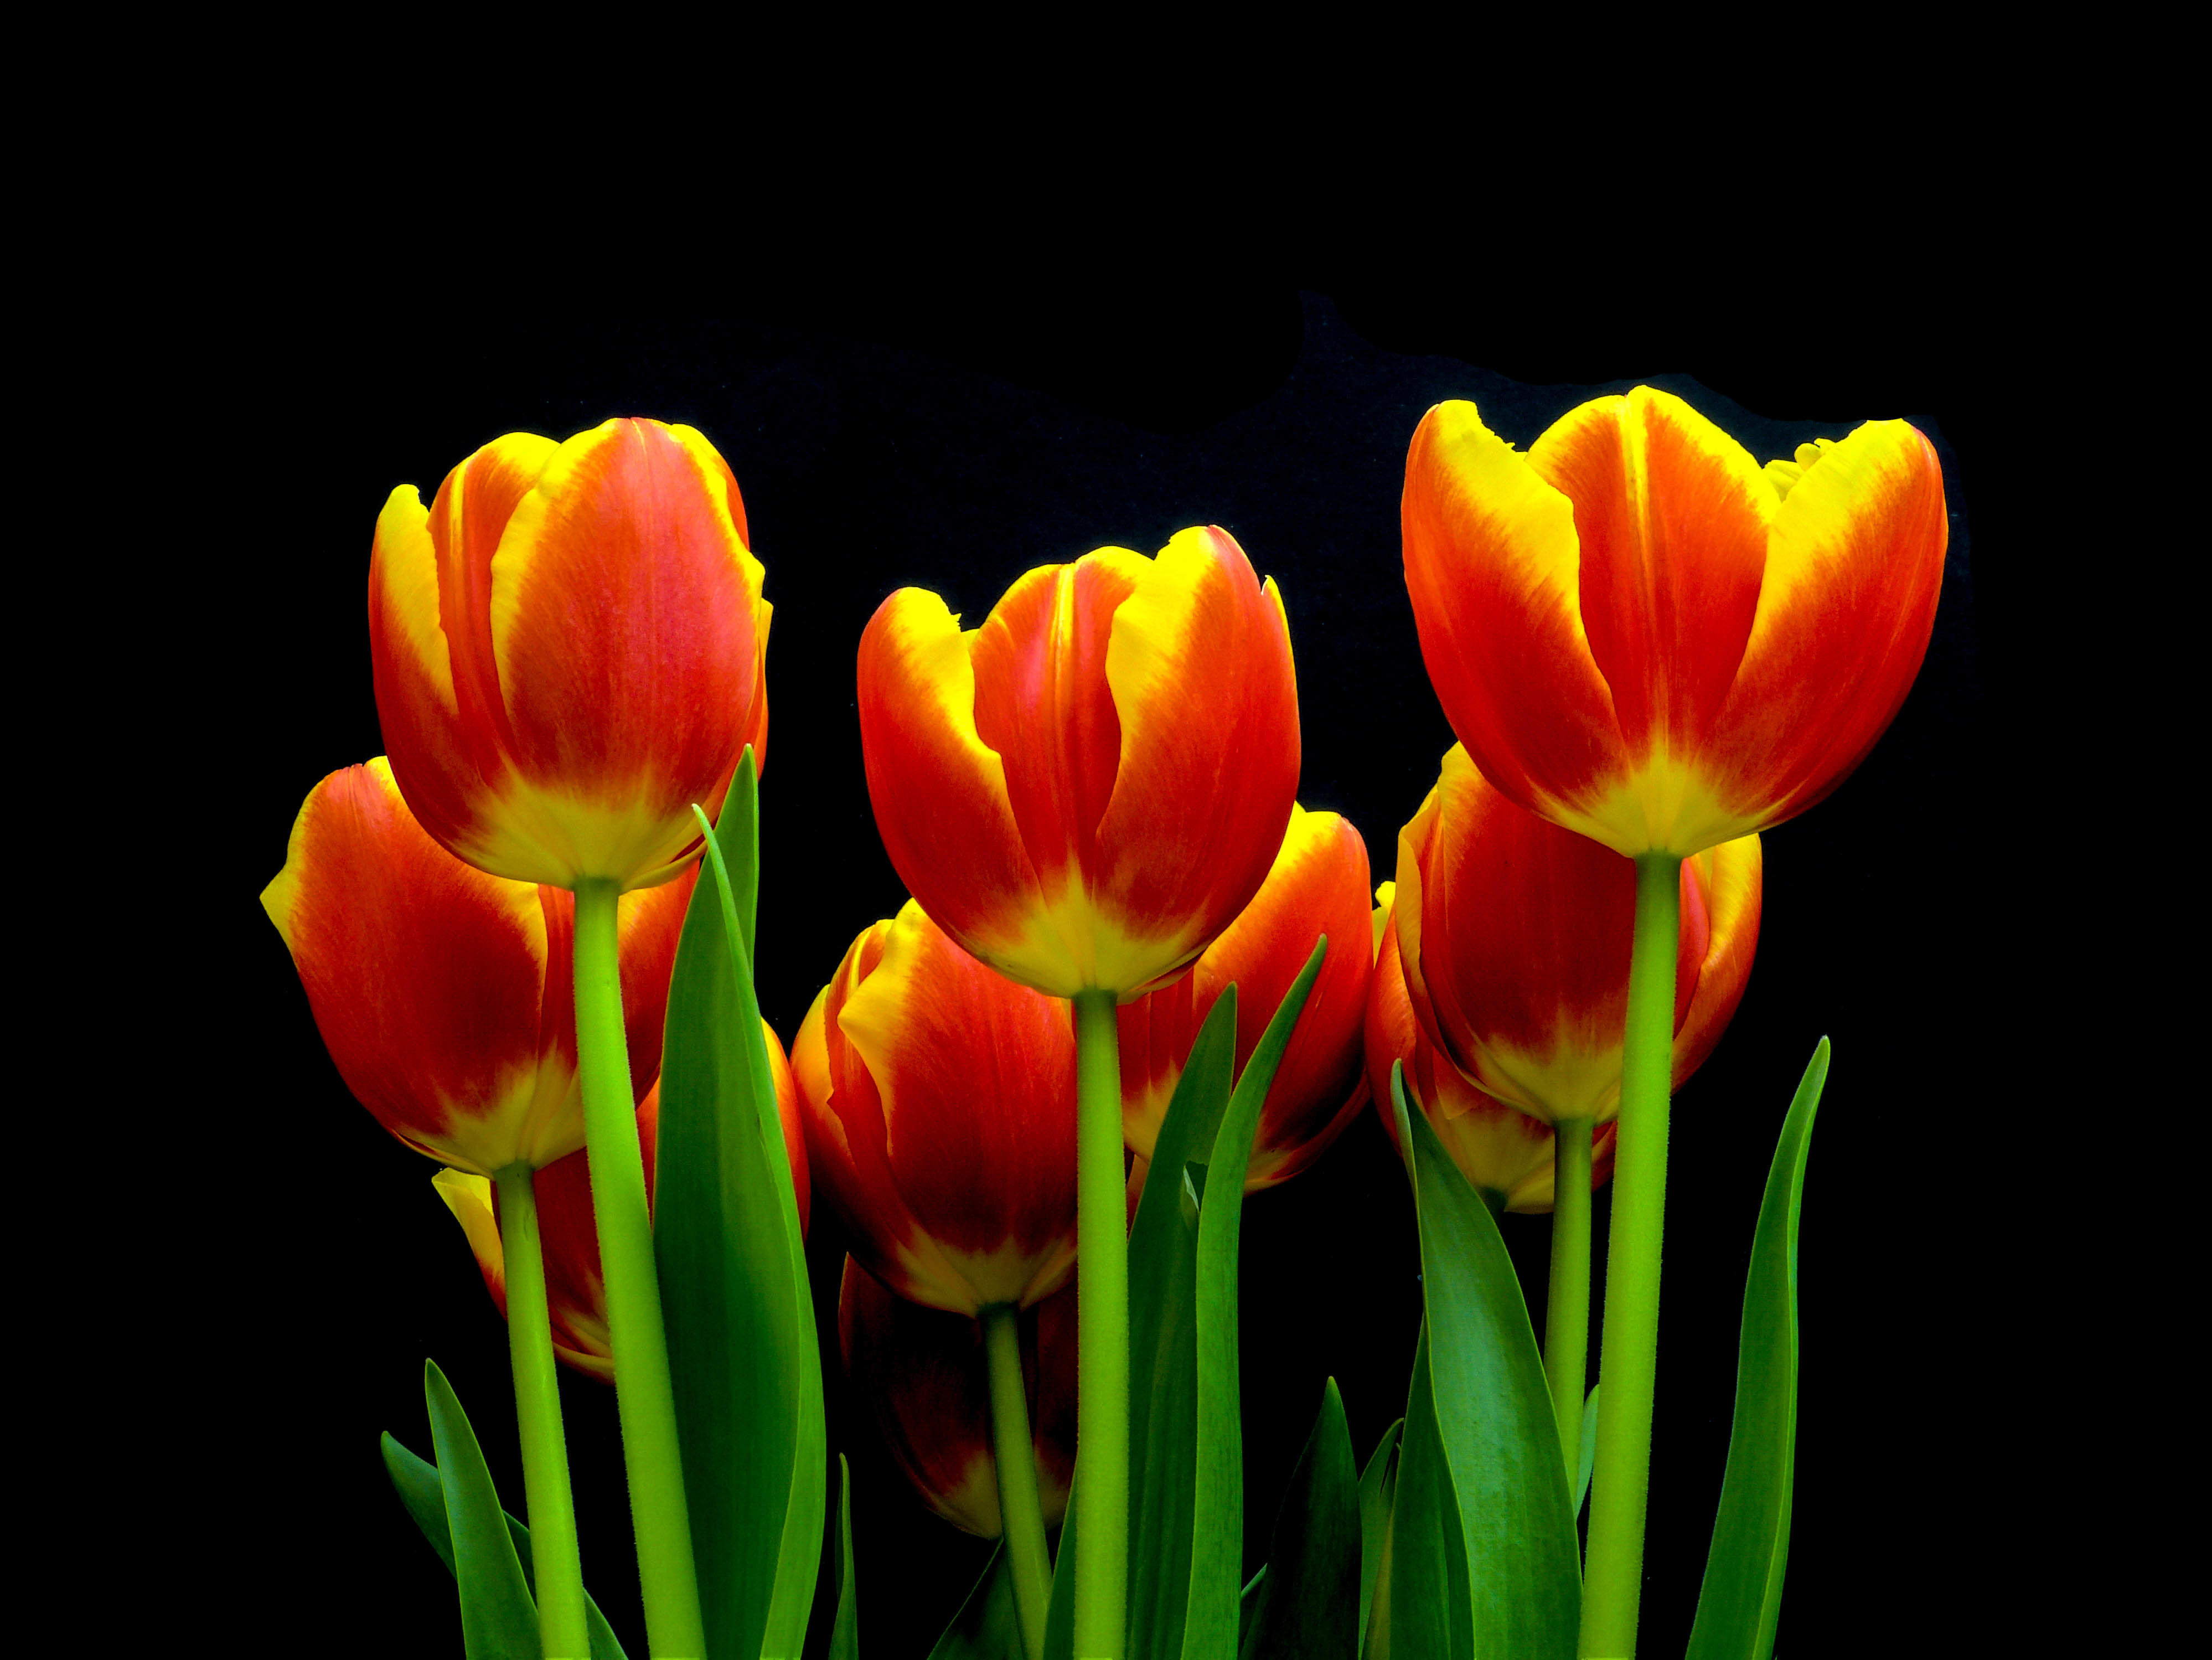 Wallpapers tulips buds red tulips on the desktop